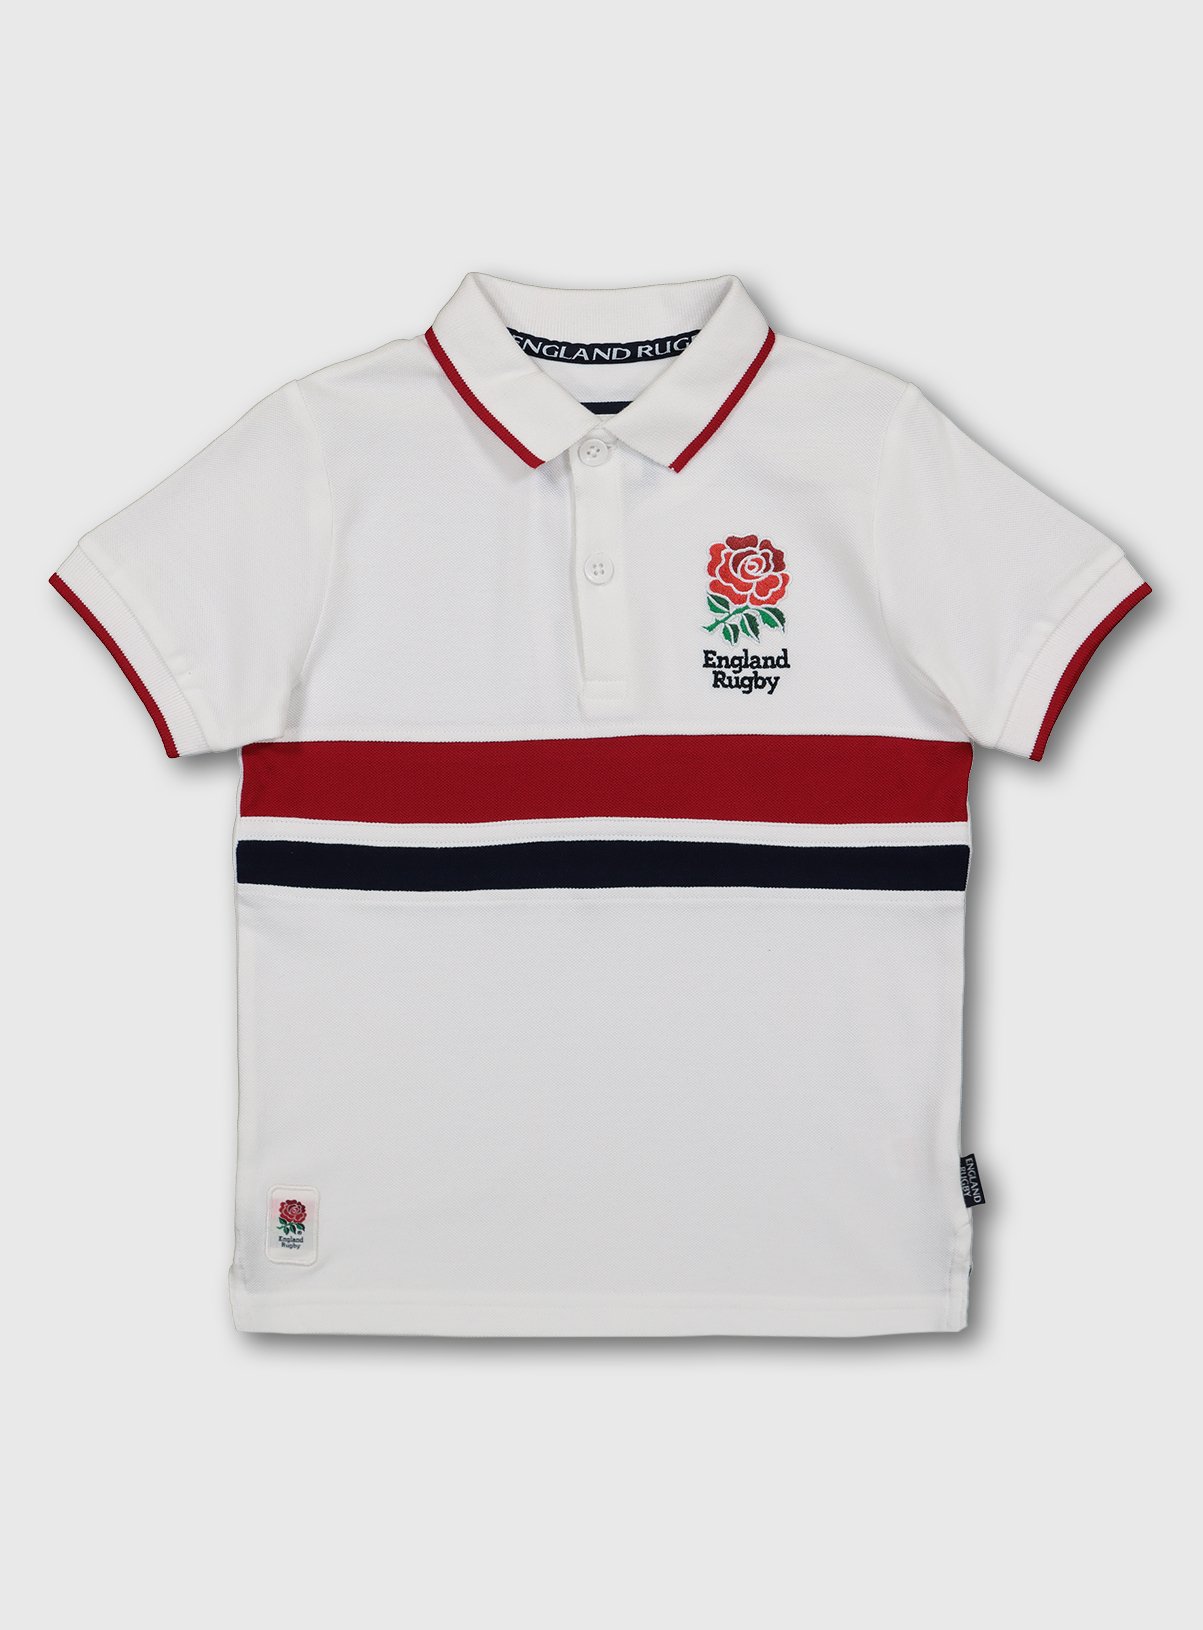 6 nations polo shirt,Save up to 19%,www.ilcascinone.com